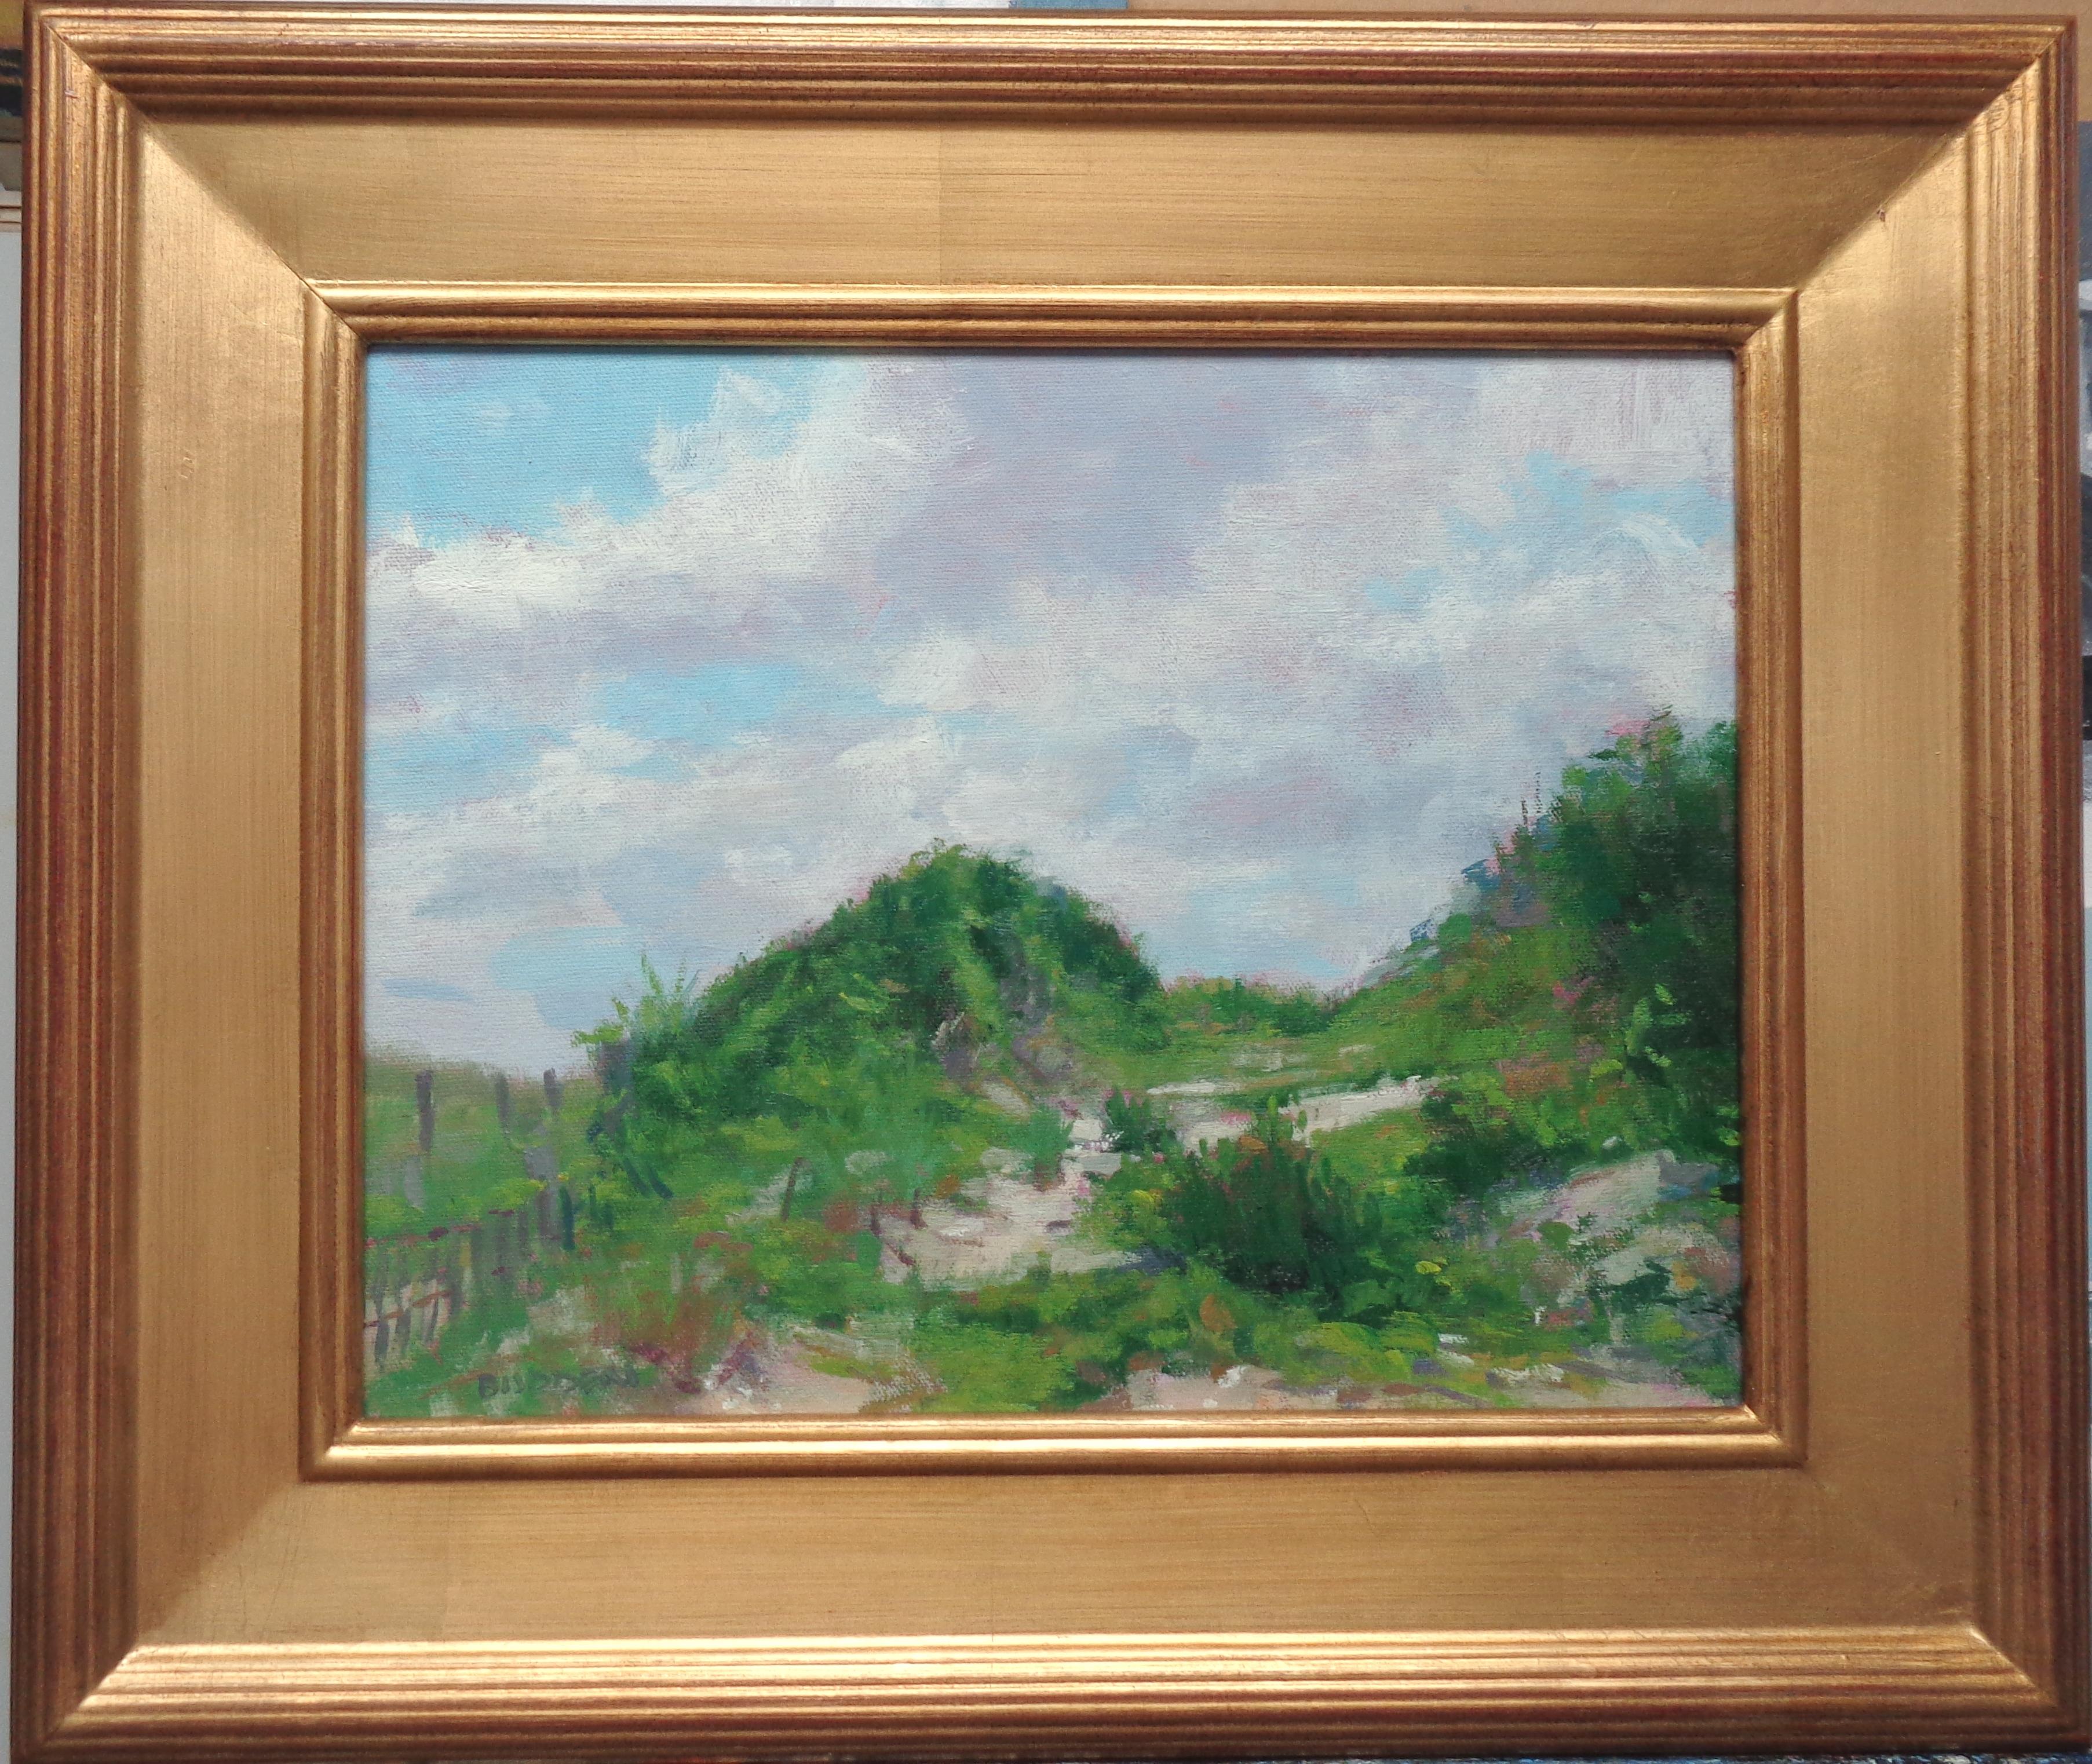 Dunes & Beach Path is an oil painting on panel by award winning contemporary artist Michael Budden that showcases a beautiful beach scene created in an impressionistic realism style and painted on location. The image measure 11 x 14 unframed and